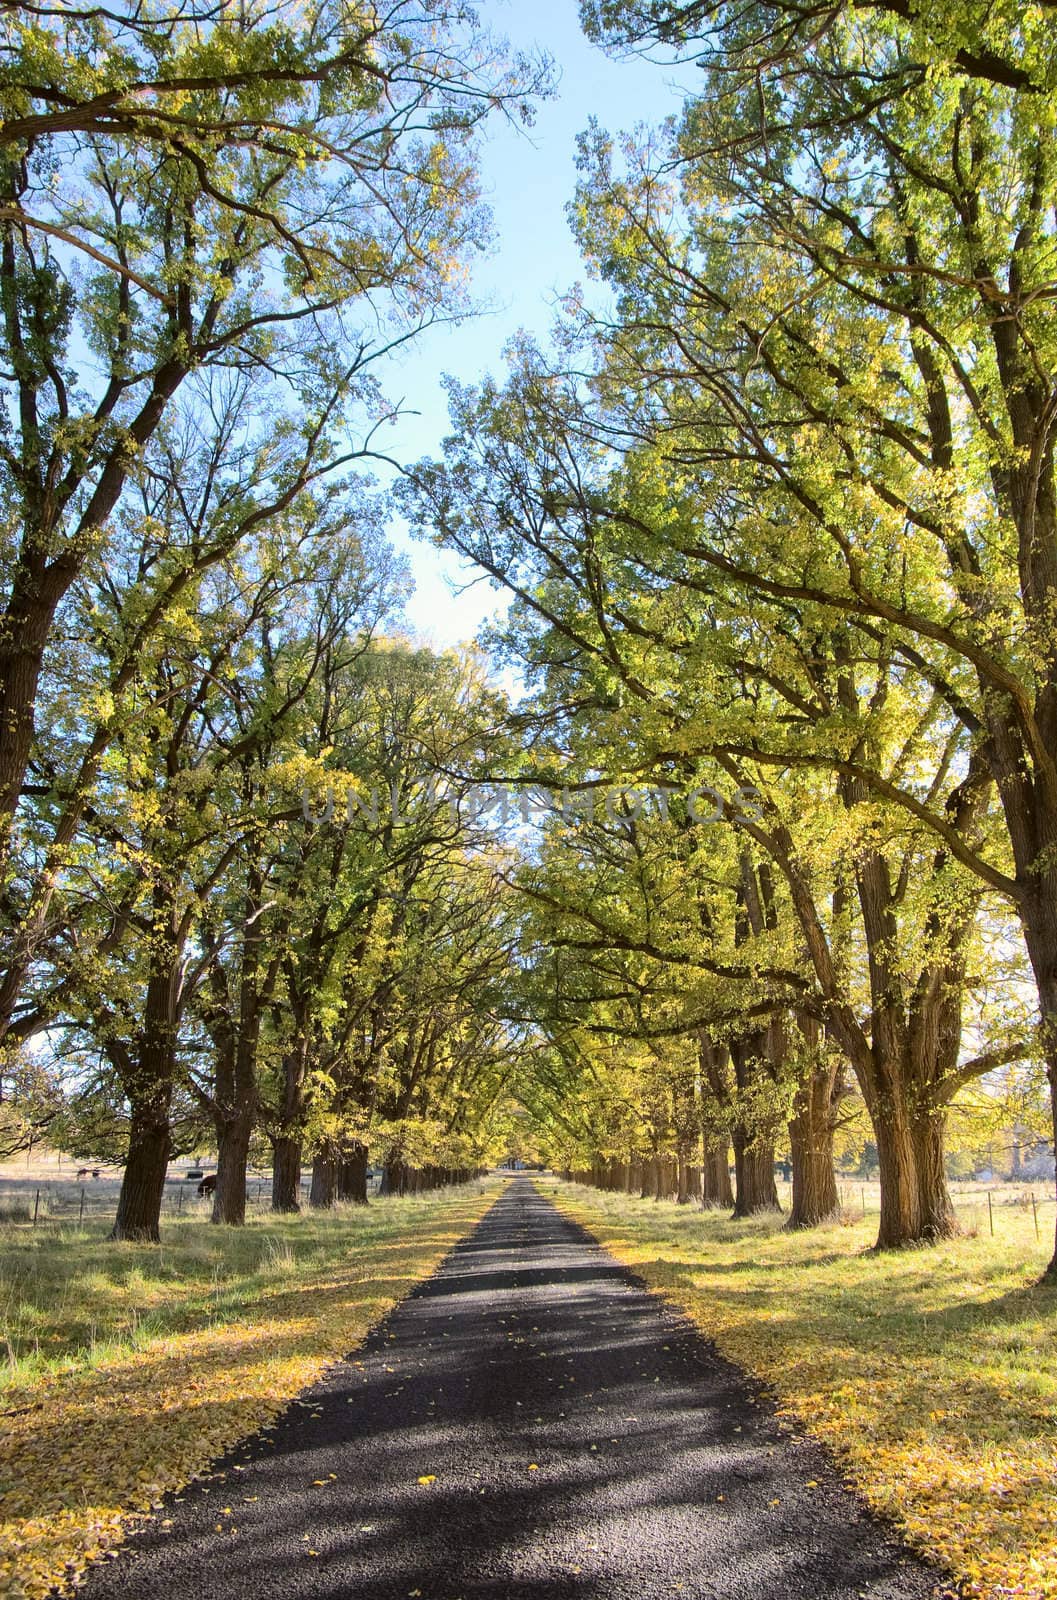 great image of an autumn country road